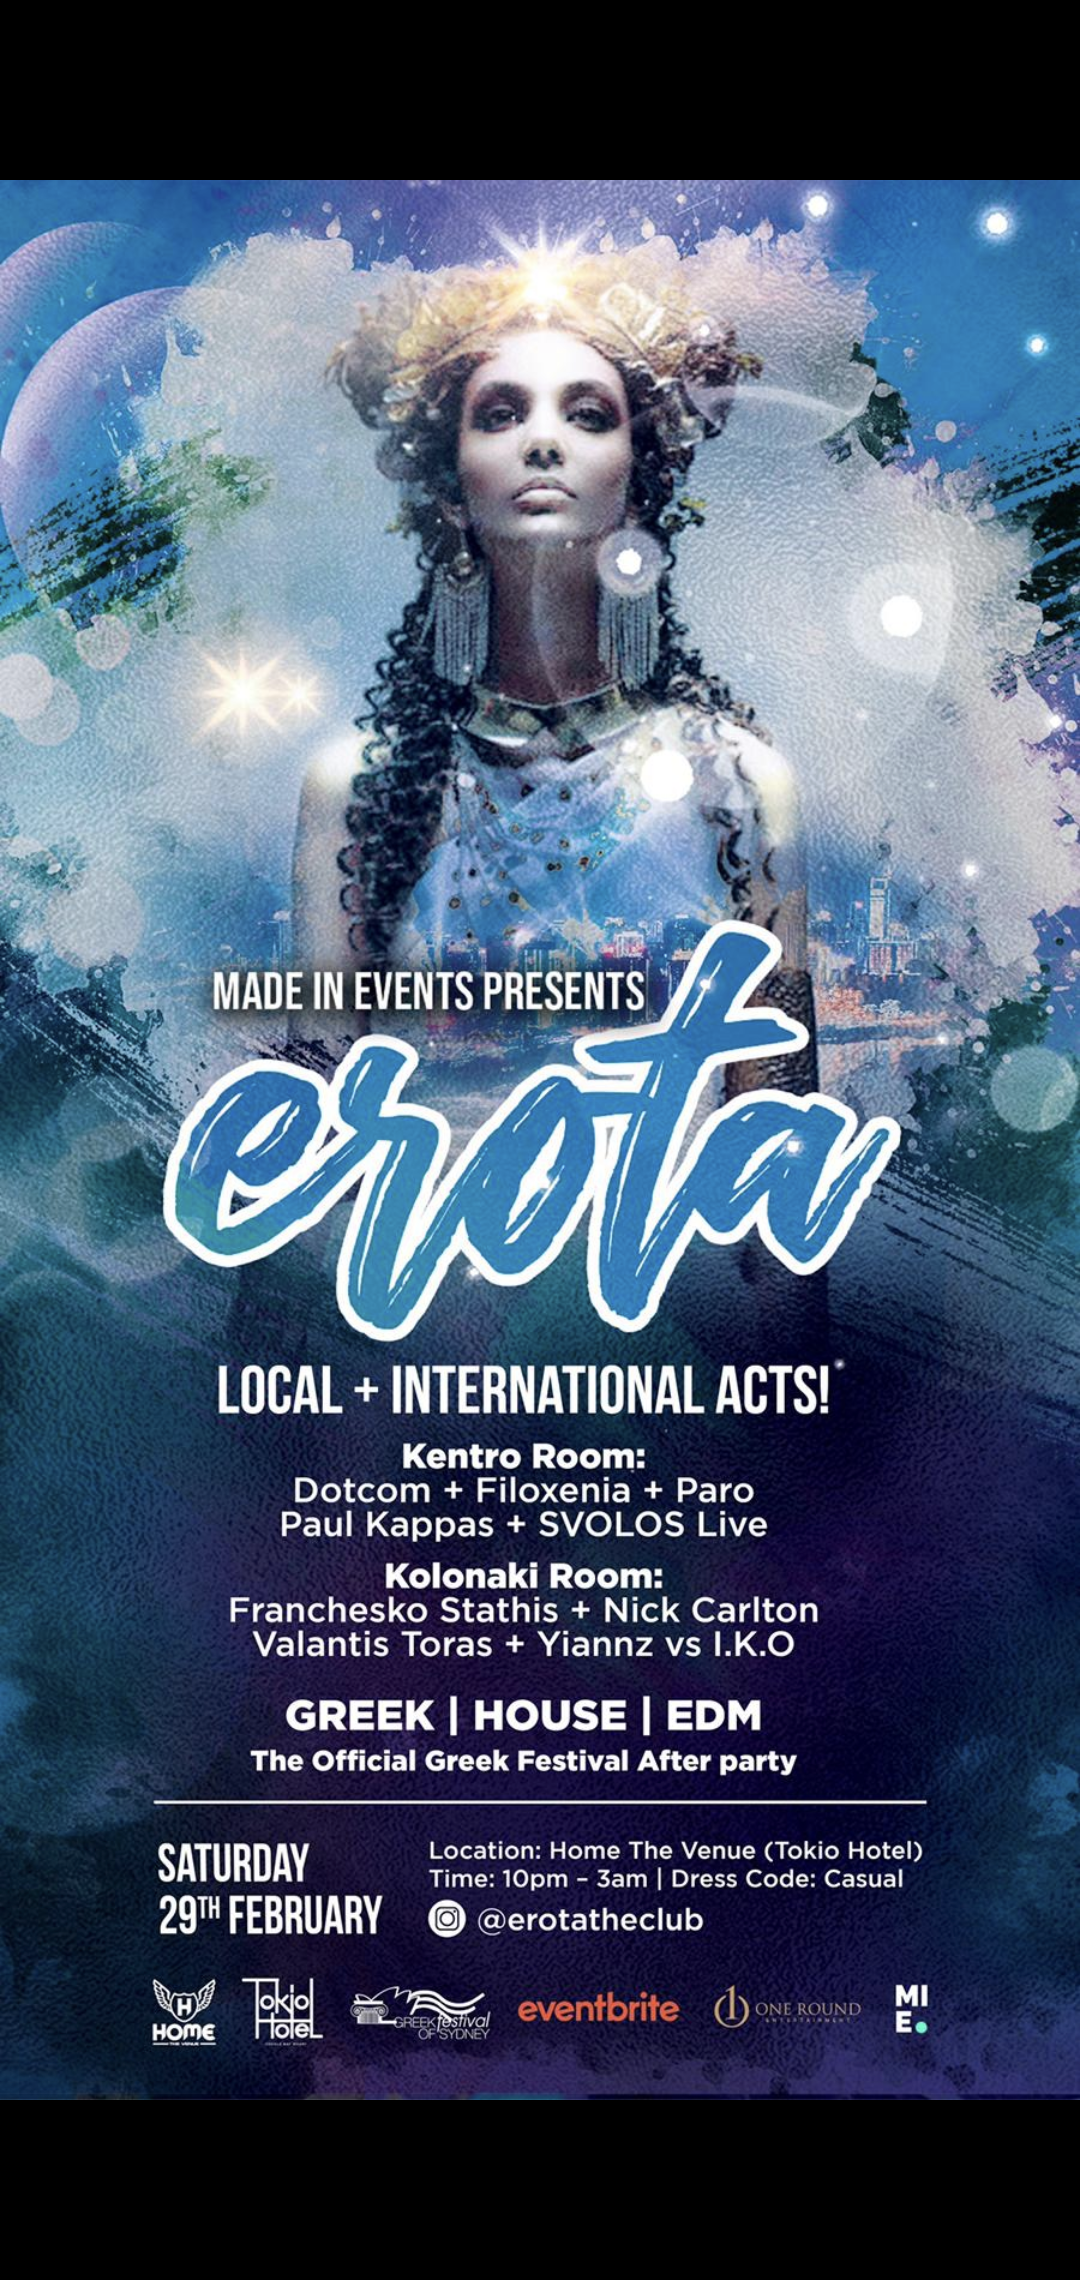 Erota: Official Greek Festival After-Party